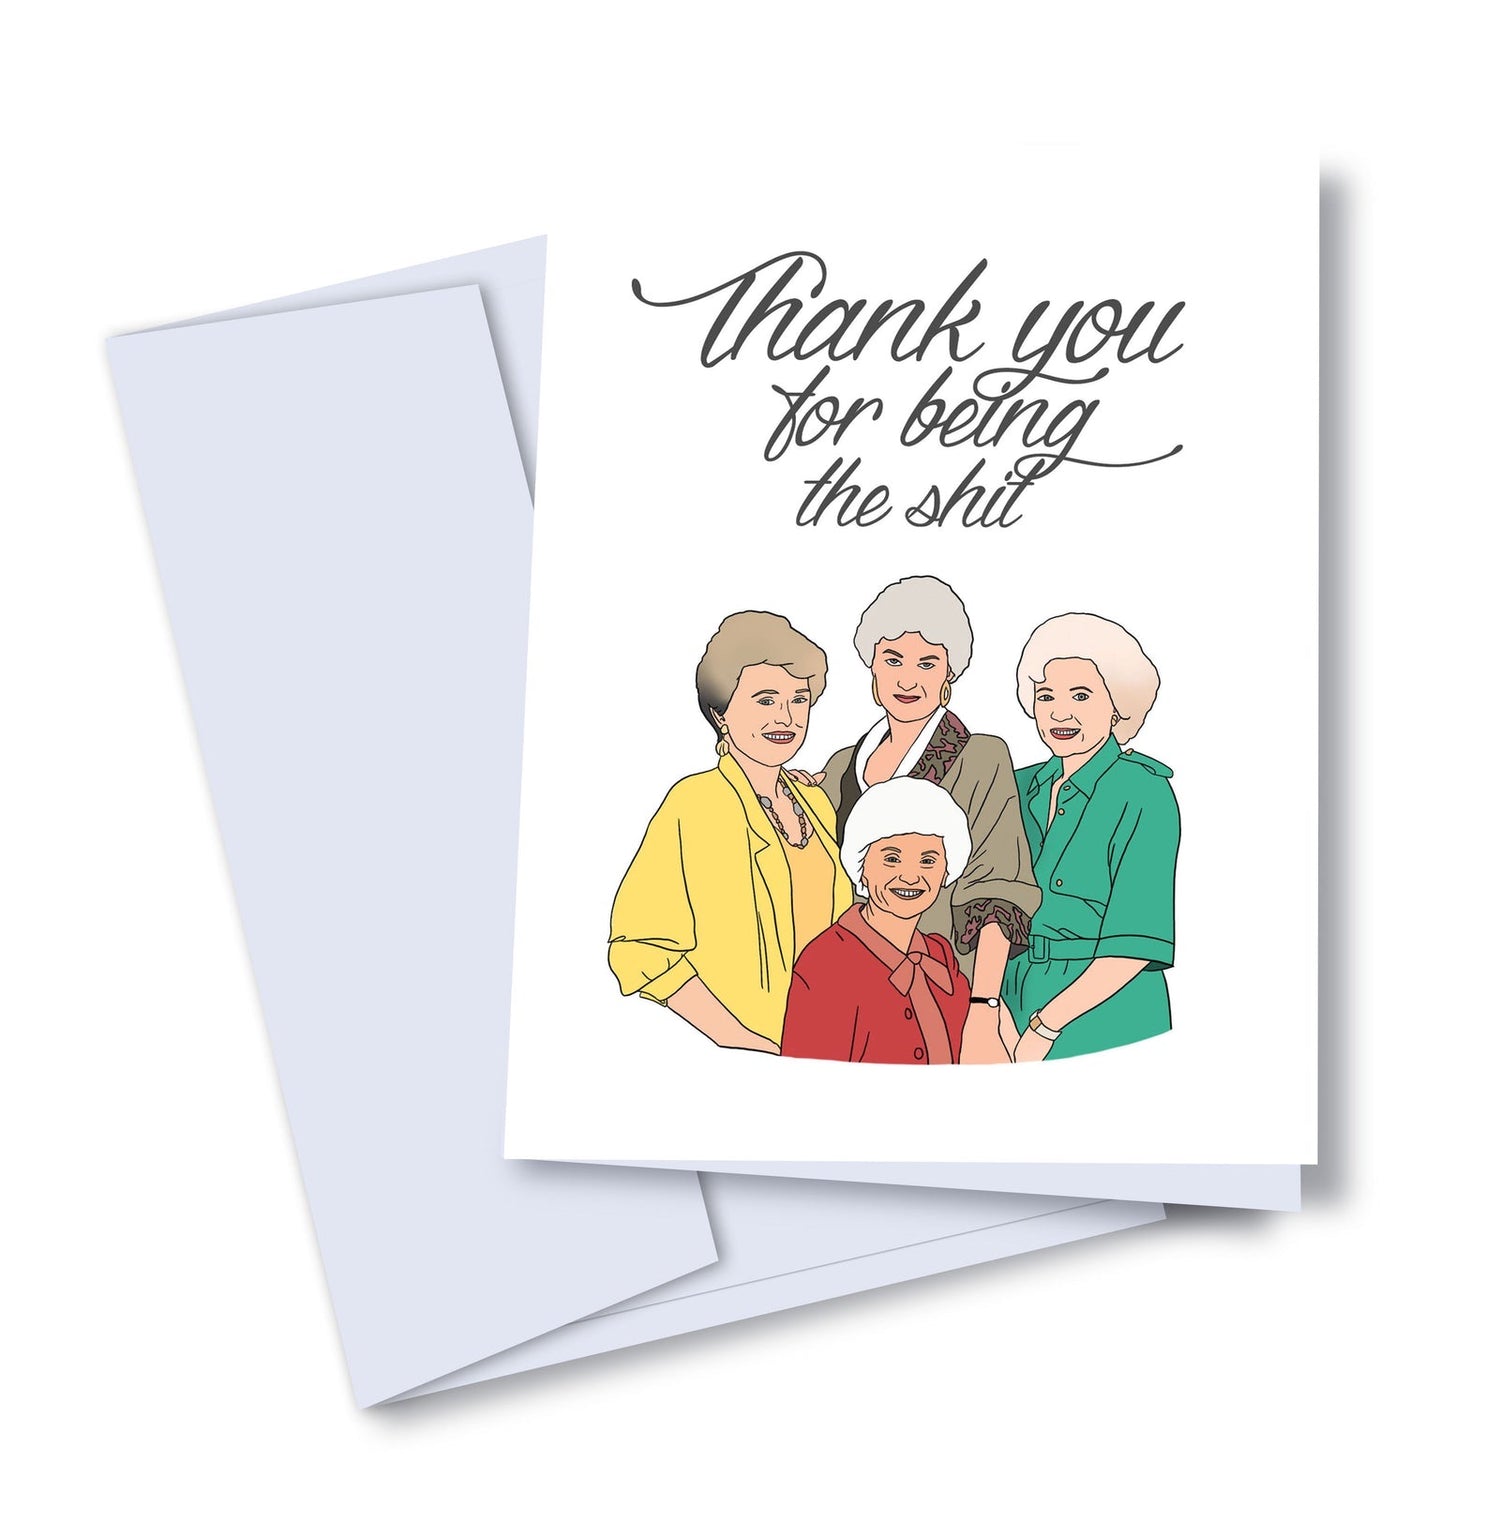 Thank You For Being The Sh*t Greeting Card - The Botanical Bar